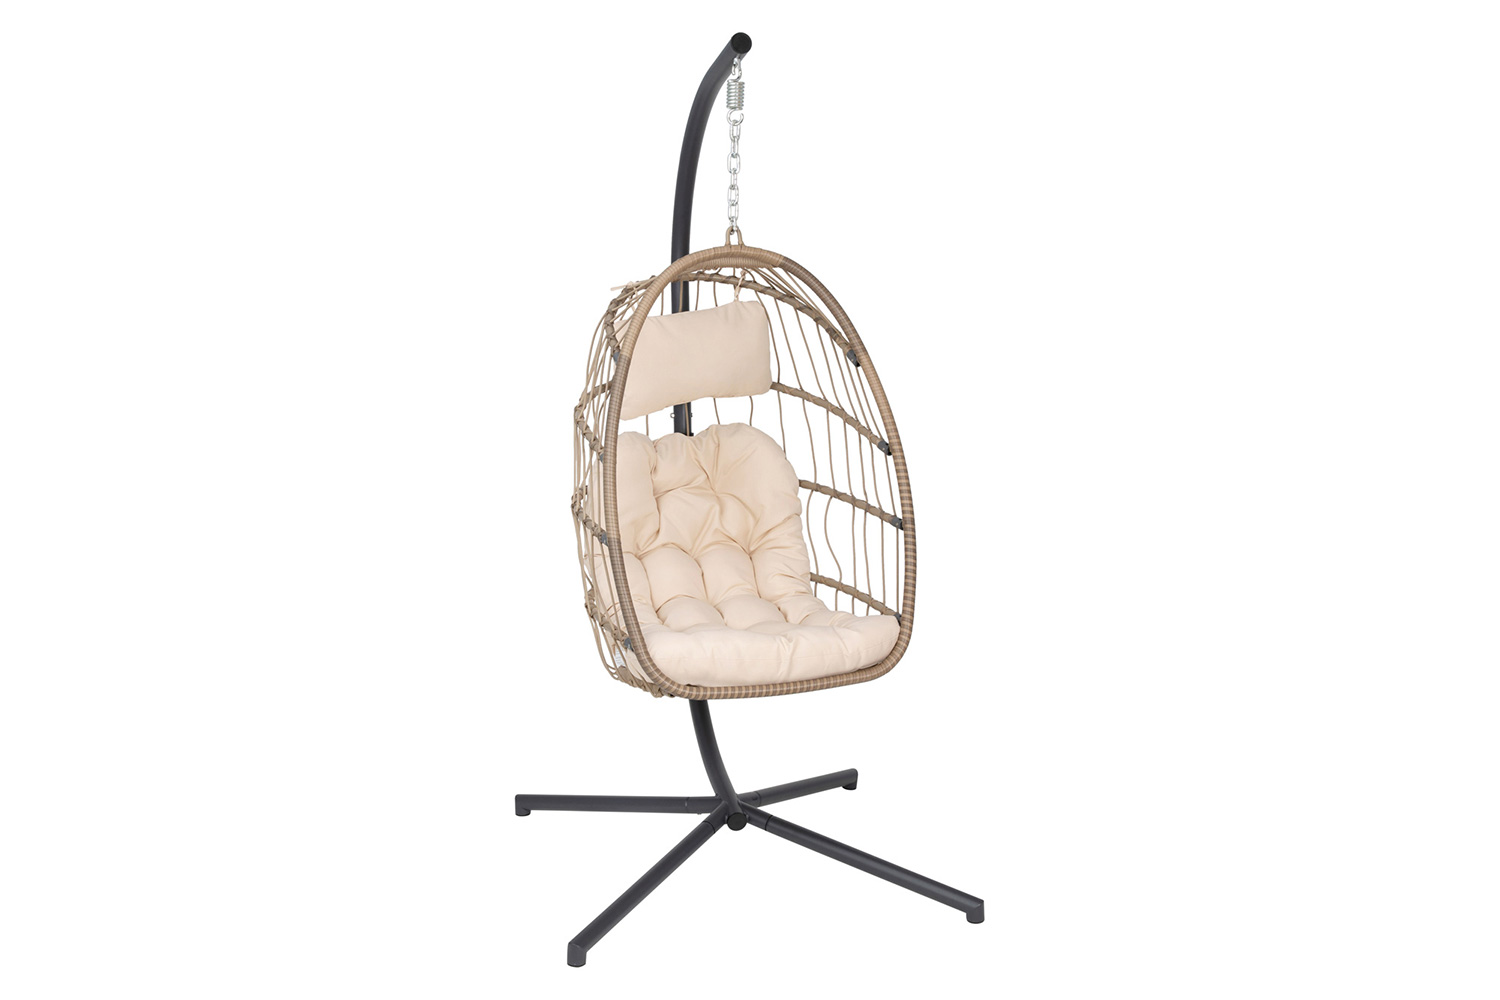 BLNK® Cleo Patio Hanging Egg Chair, Wicker Hammock with Soft Seat Cushions and Swing Stand - Natural/Cream